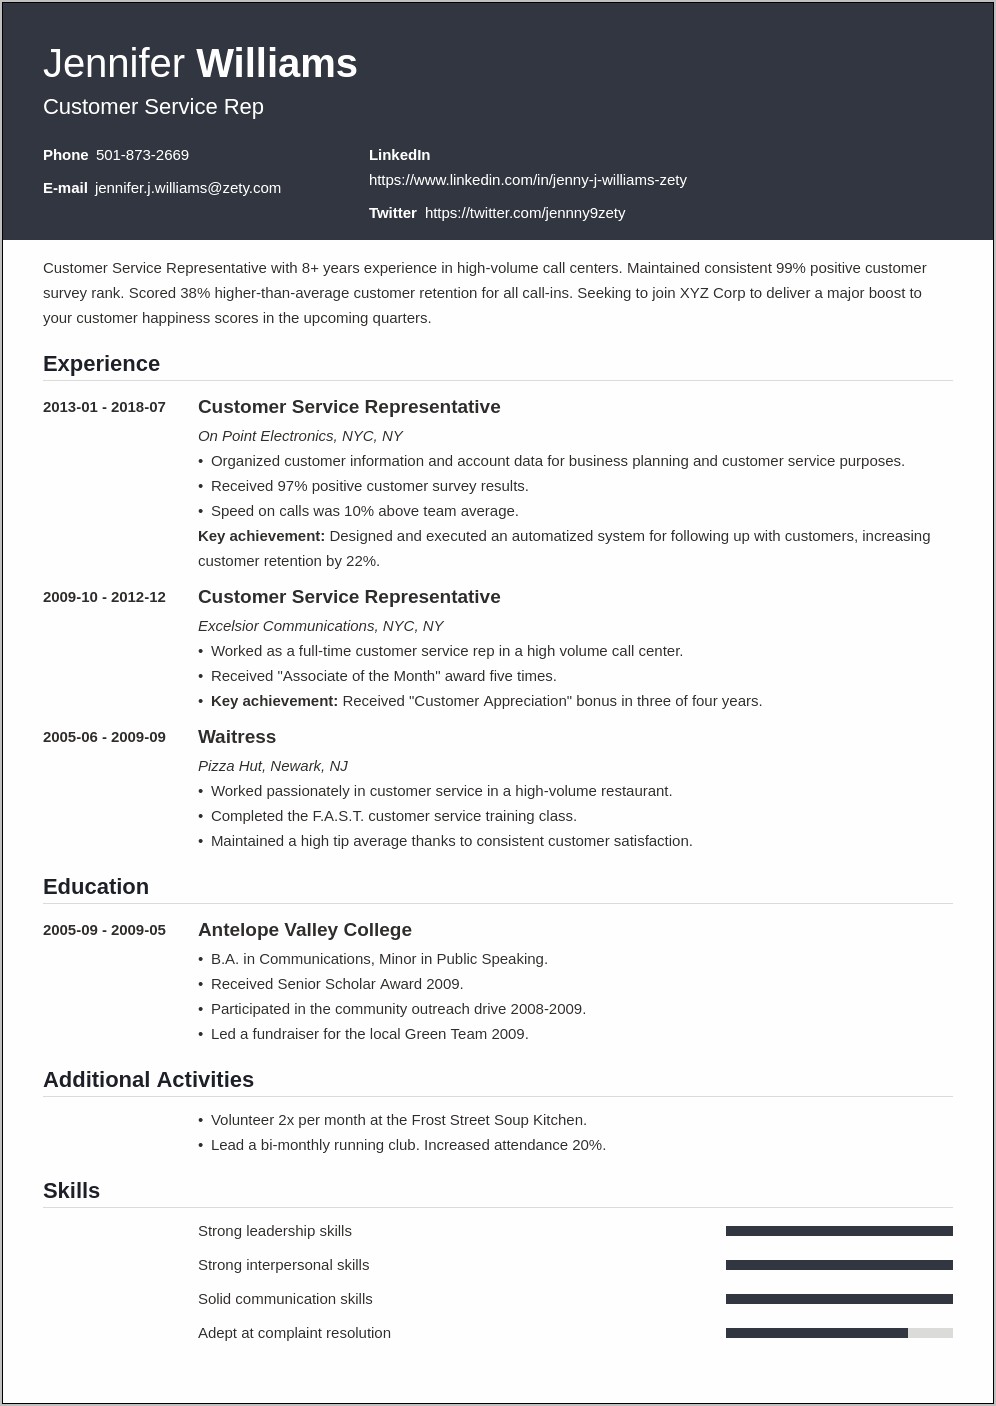 Is A Professional Summary On A Resume Necessary